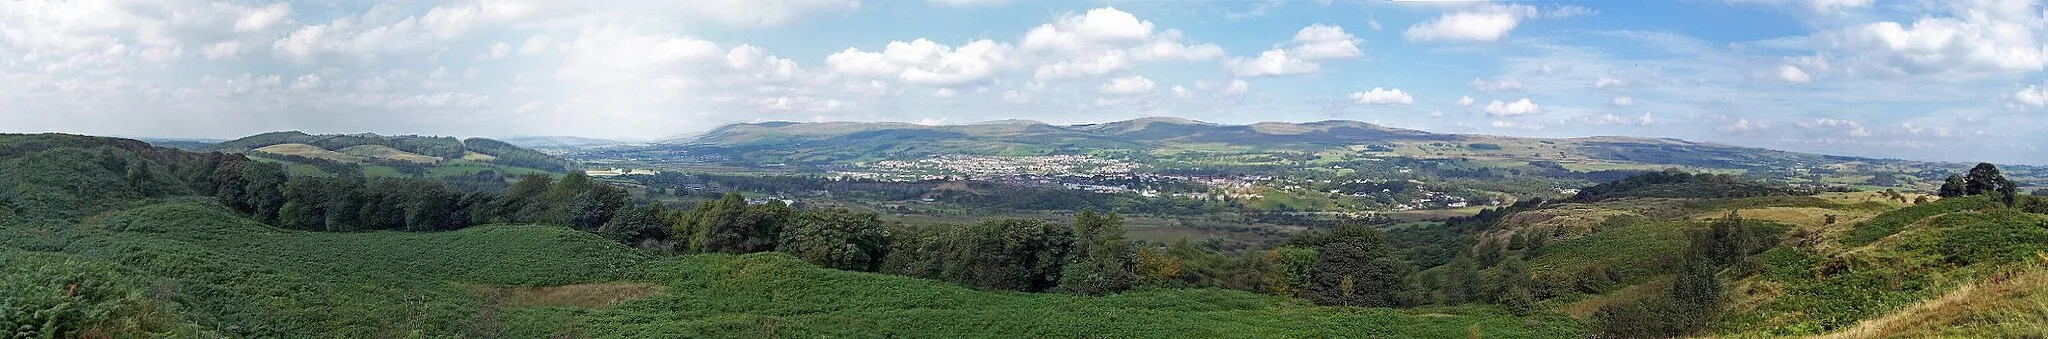 Photo showing: Kilsyth panorama from Croy Hill and the Antonine Wall, looking over Kilsyth towards the Kilsyth Hills.